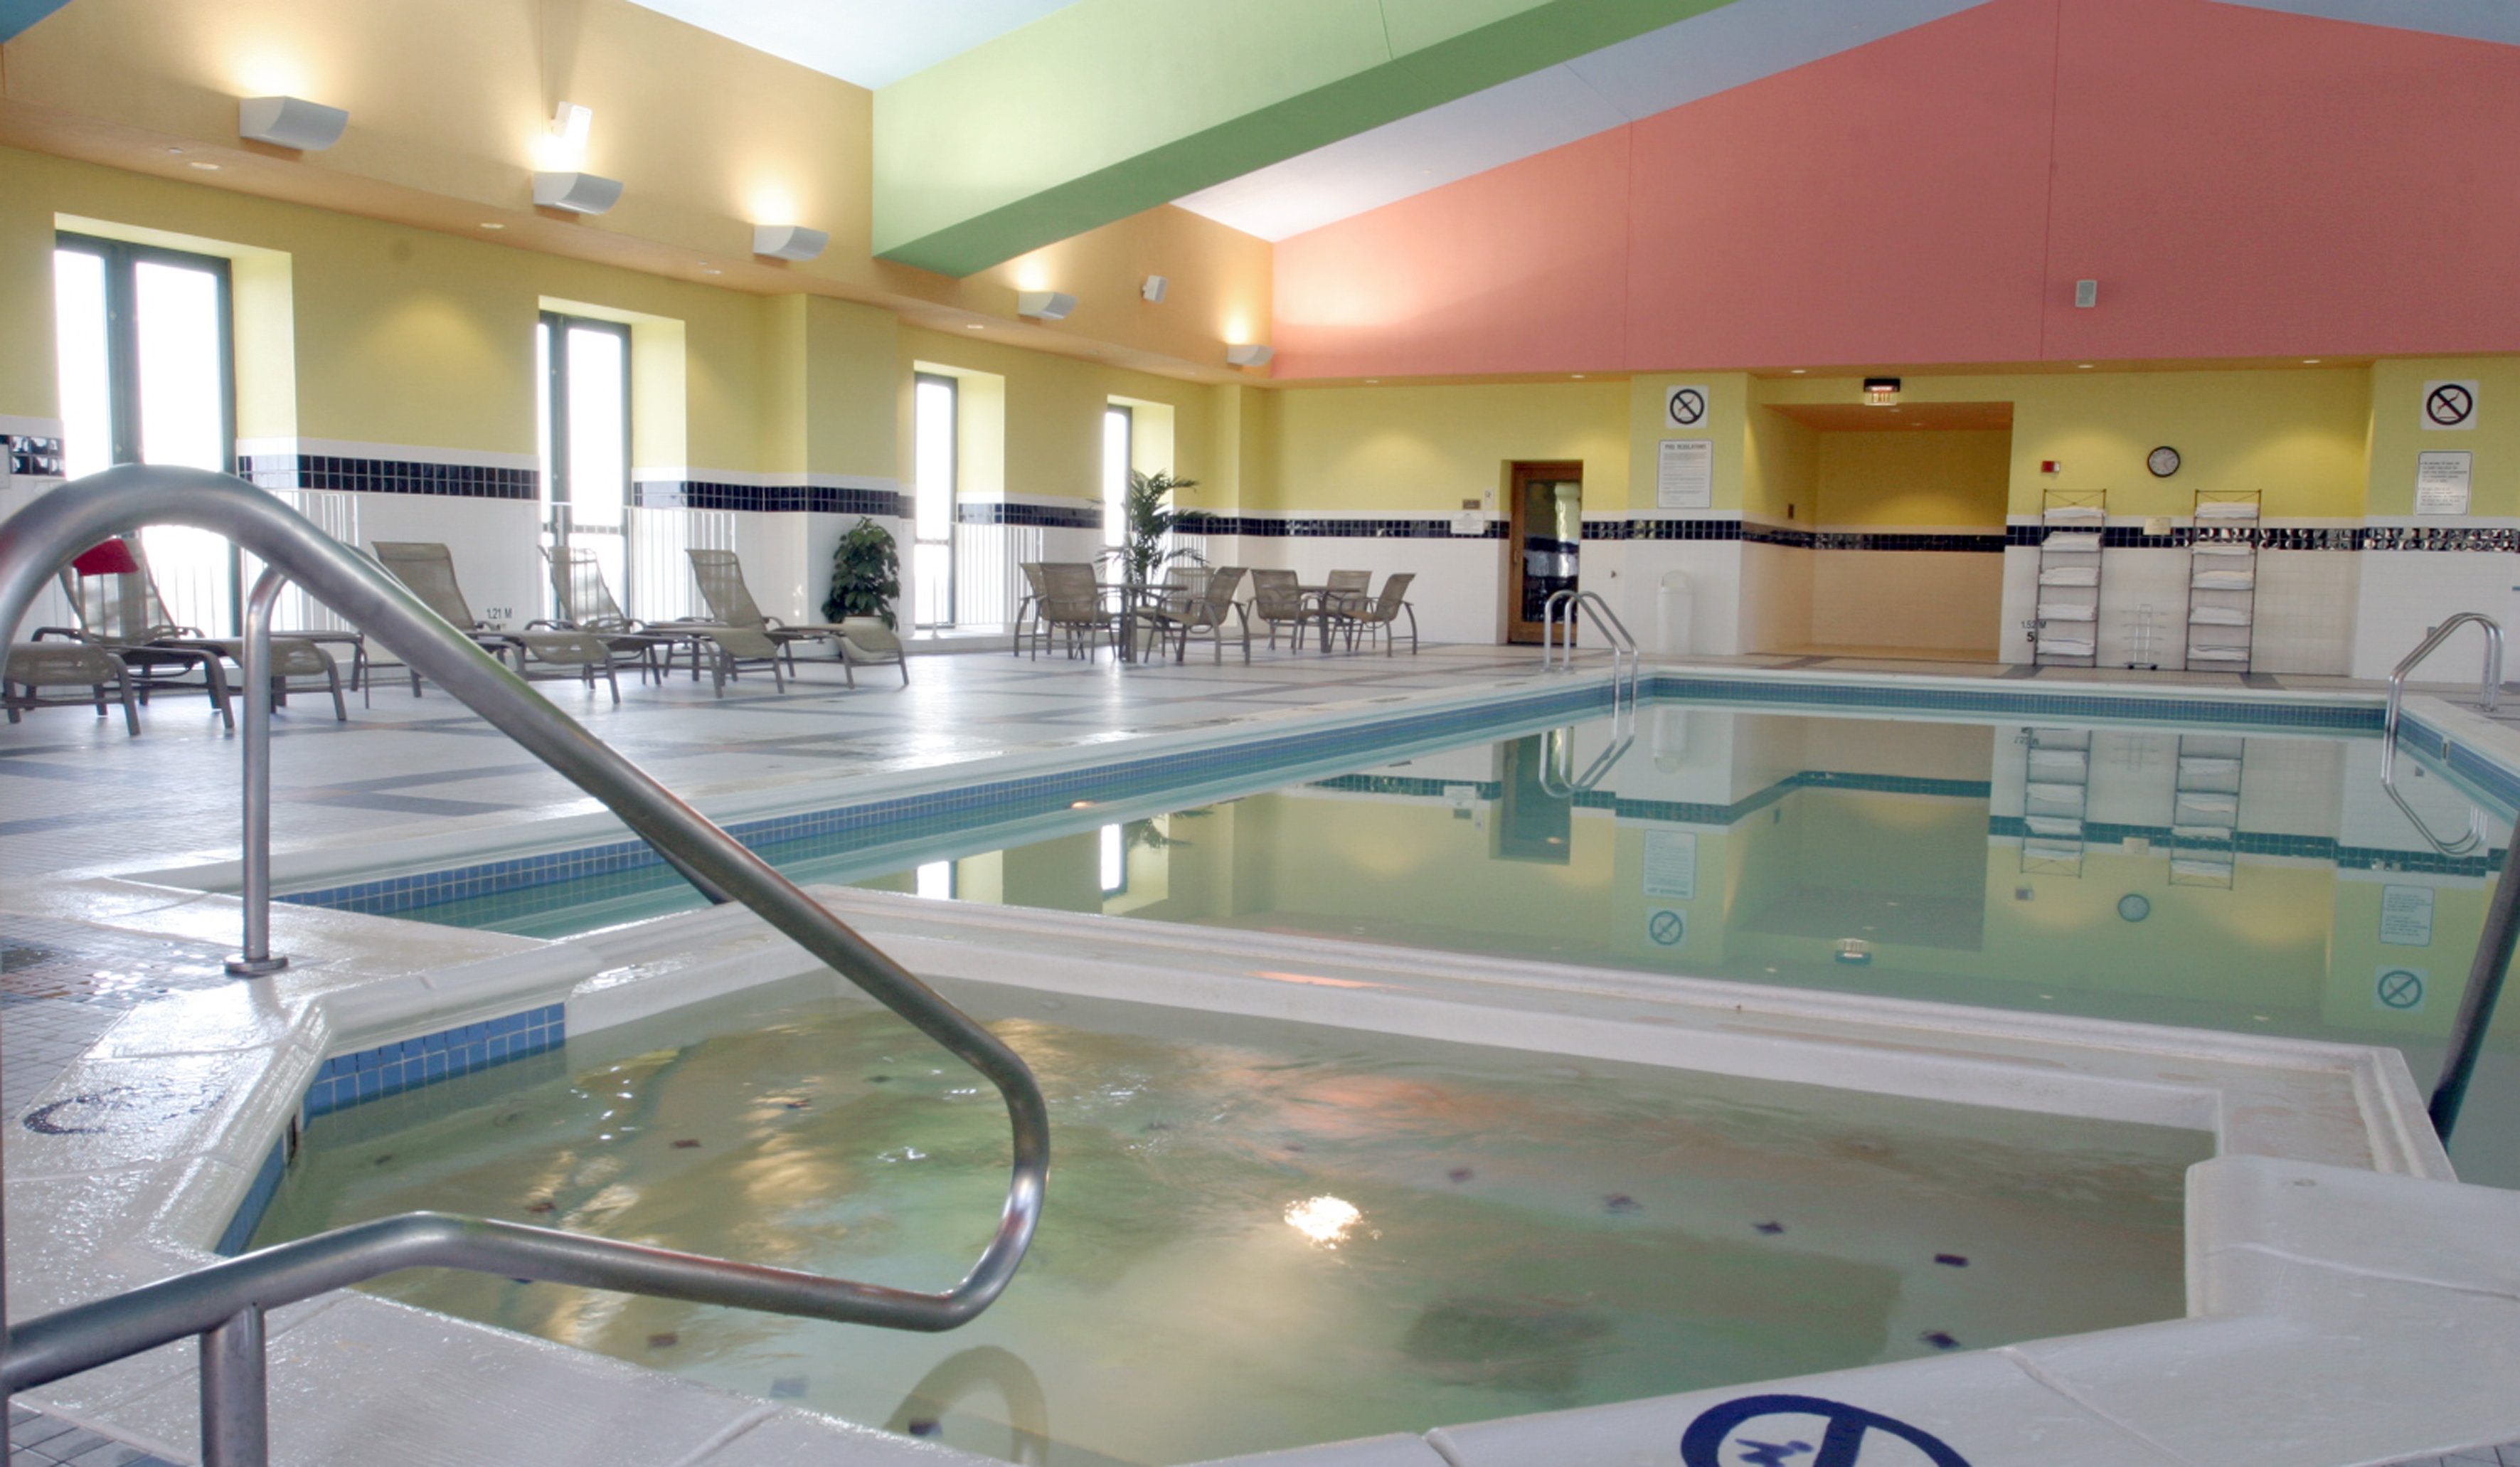 Relax in the Crowne Plaza Springfield indoor pool with hot tub.